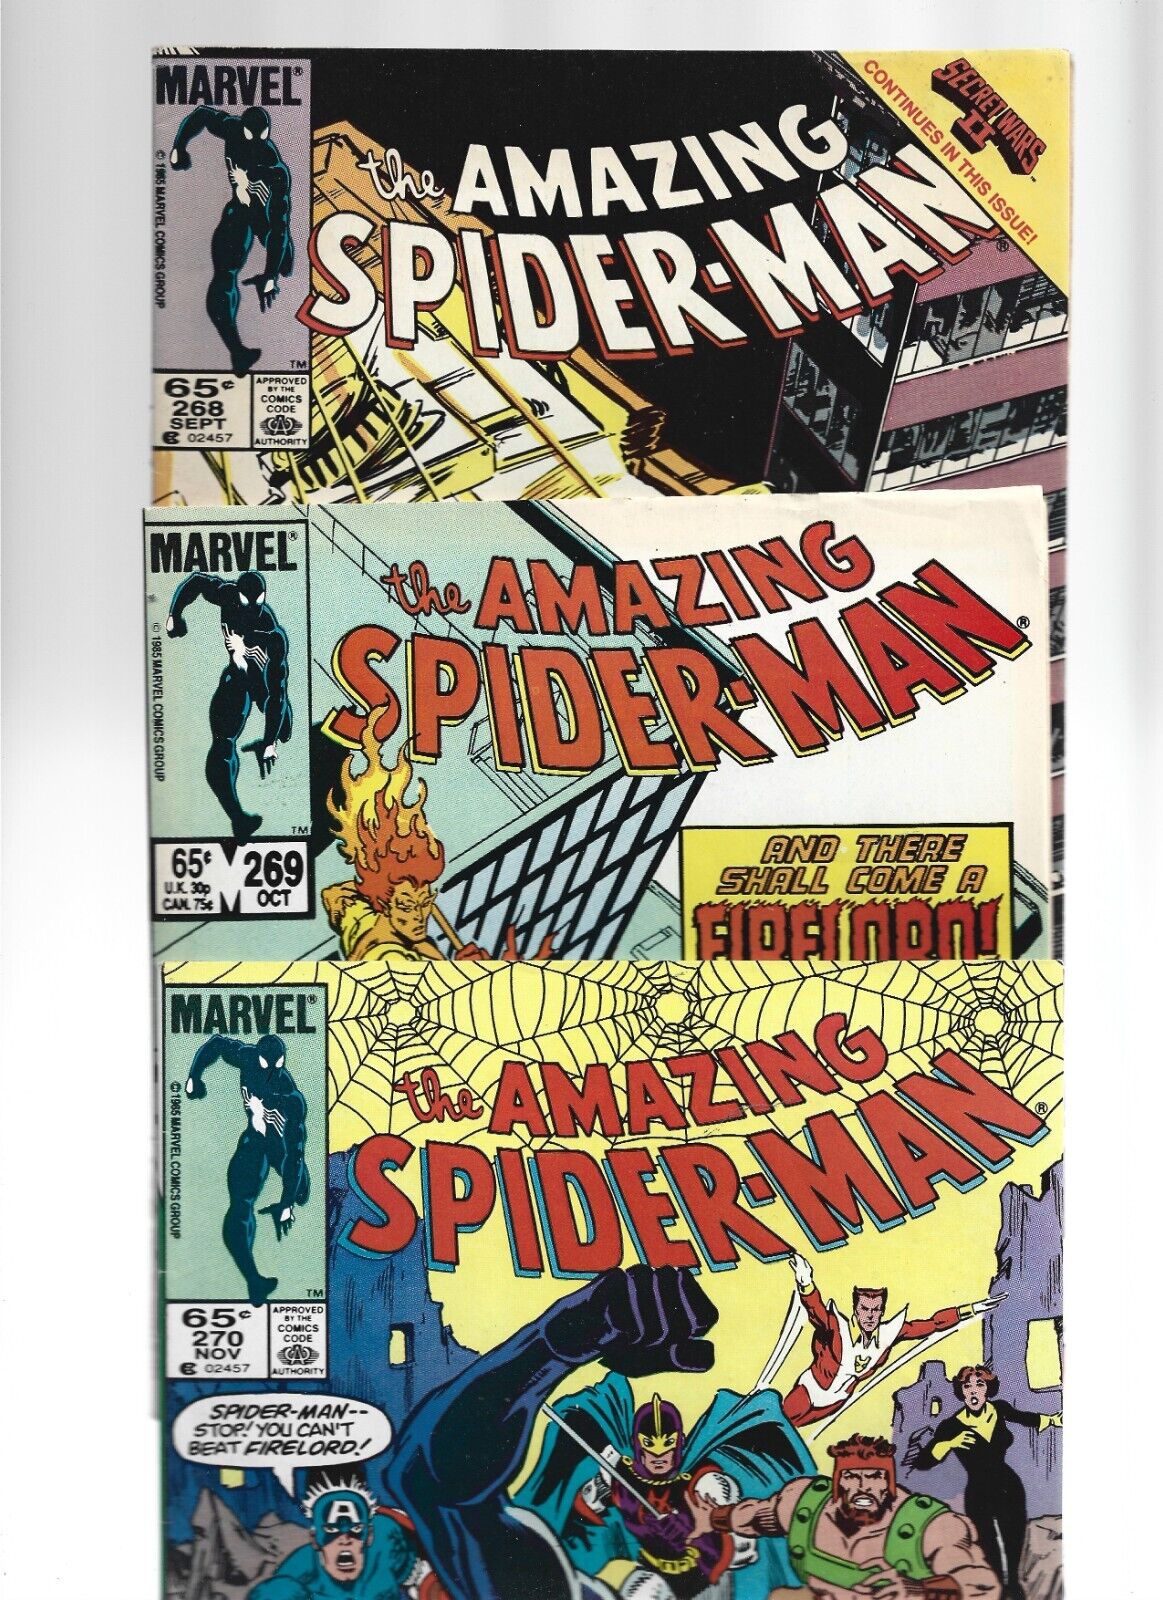 *WOW HOT* MARVEL AMAZING SPIDER-MAN RUN LOT OF 3 COPPER AGE COMICS #\'s 268-270